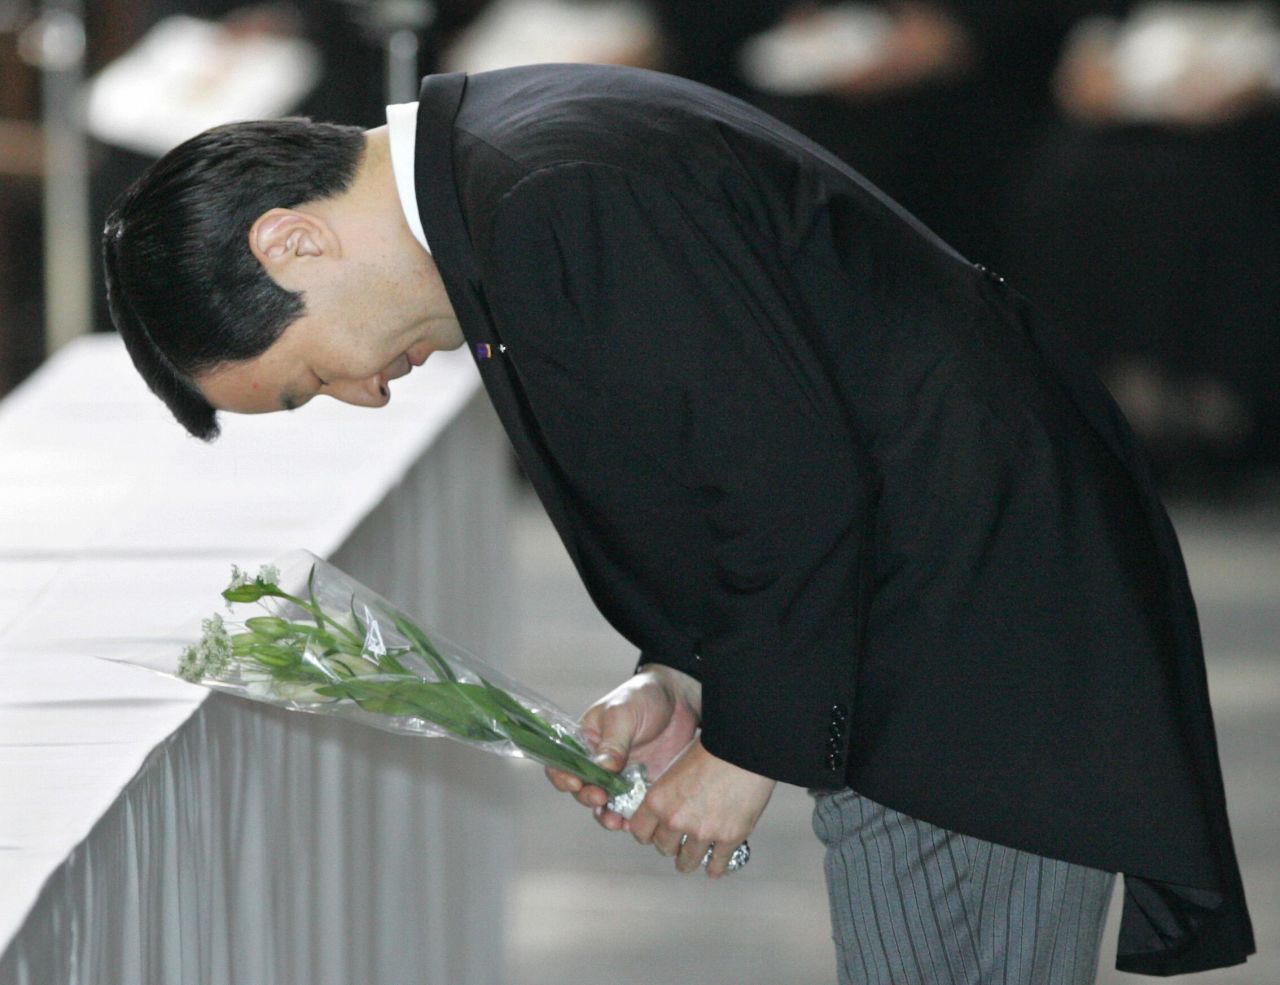 Naruhito pays his respects to the late Pope John Paul II during a memorial service in Tokyo in April 2005.